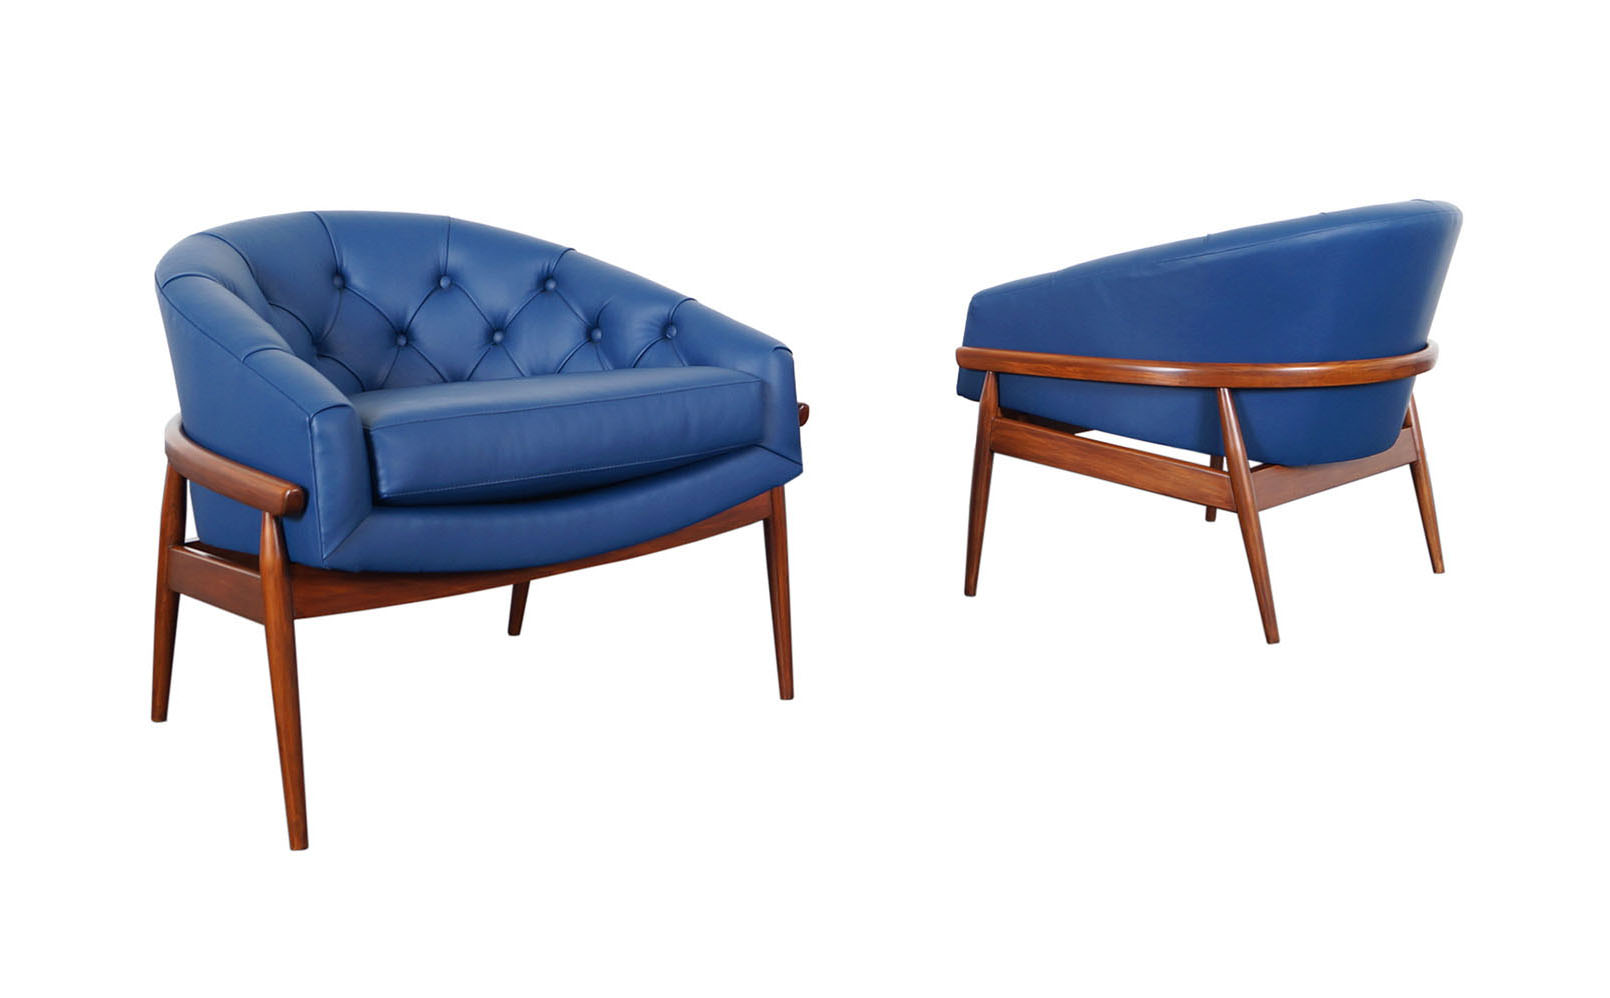 Vintage Leather Tufted Barrel Lounge Chairs by Milo Baughman